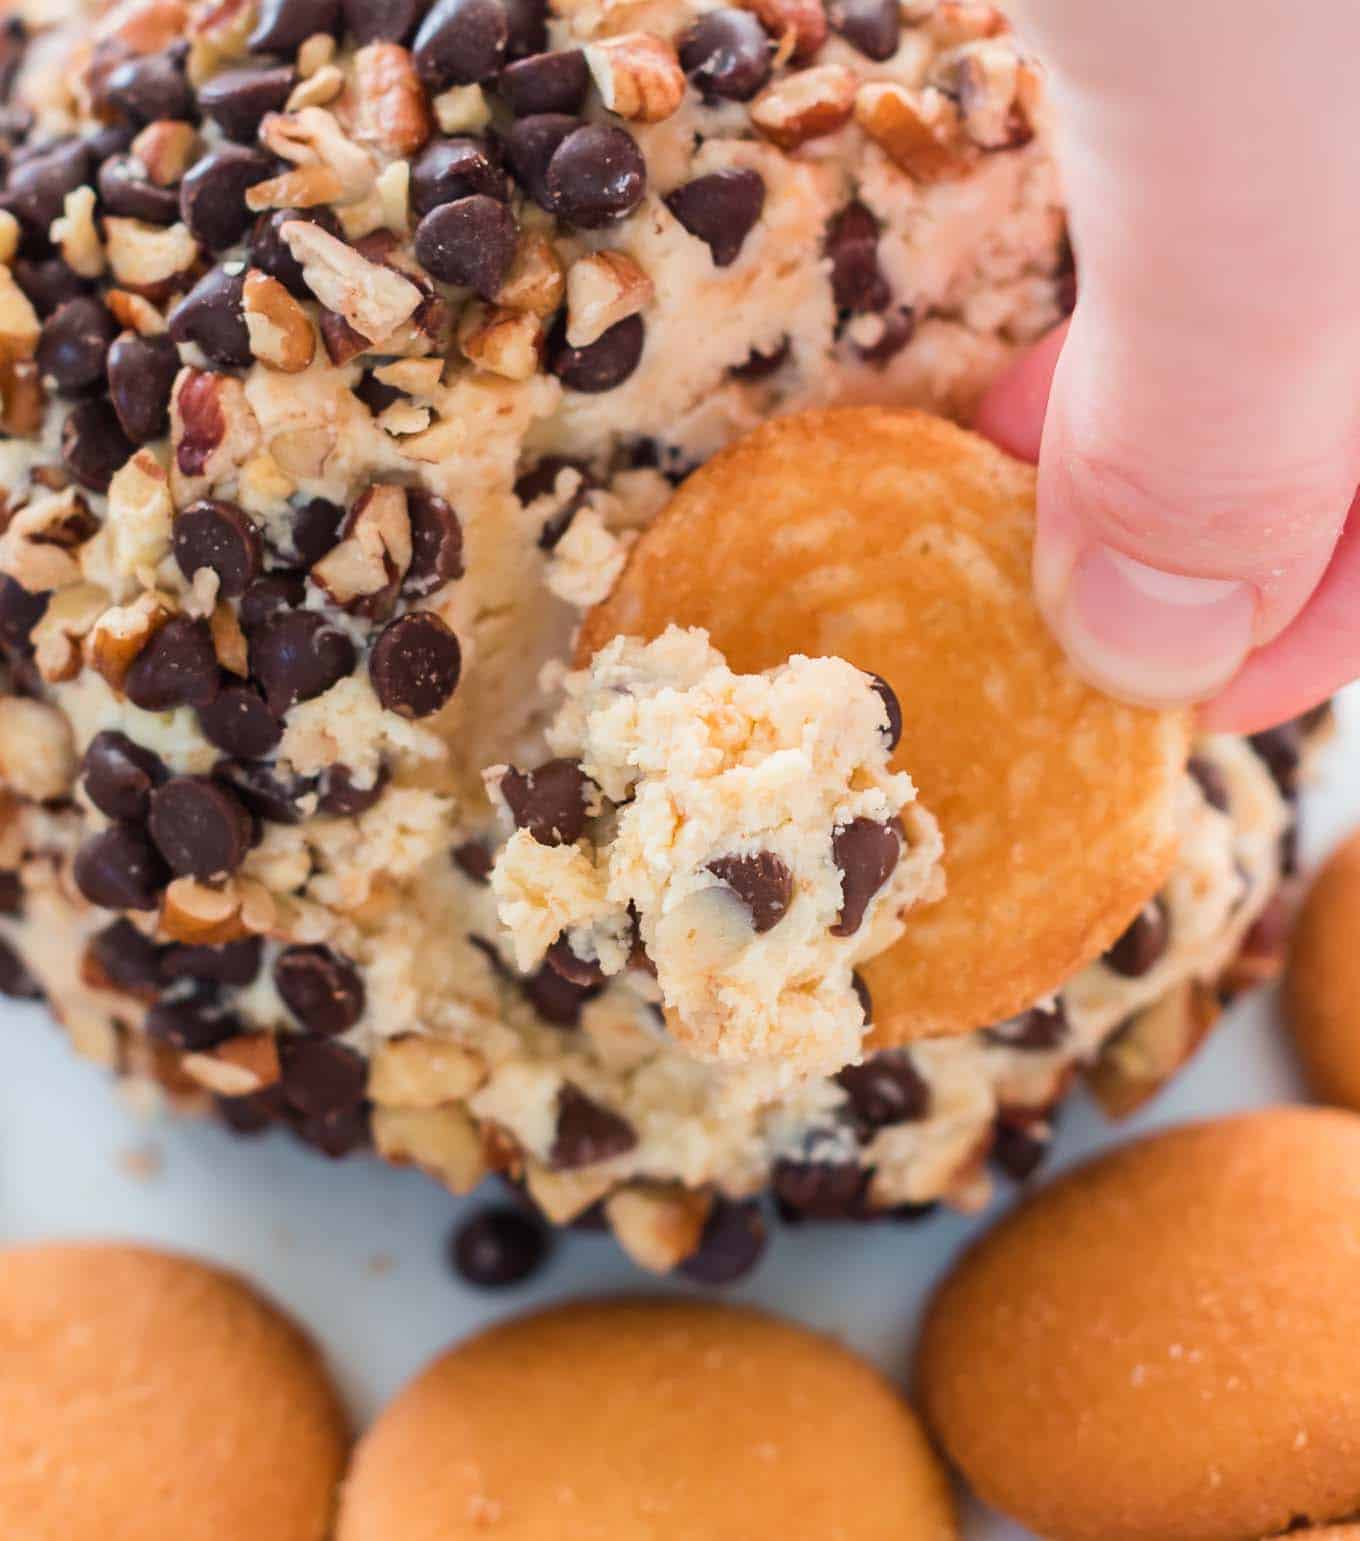 a hand dipping a nilla wafer in the chocolate chip cheese ball